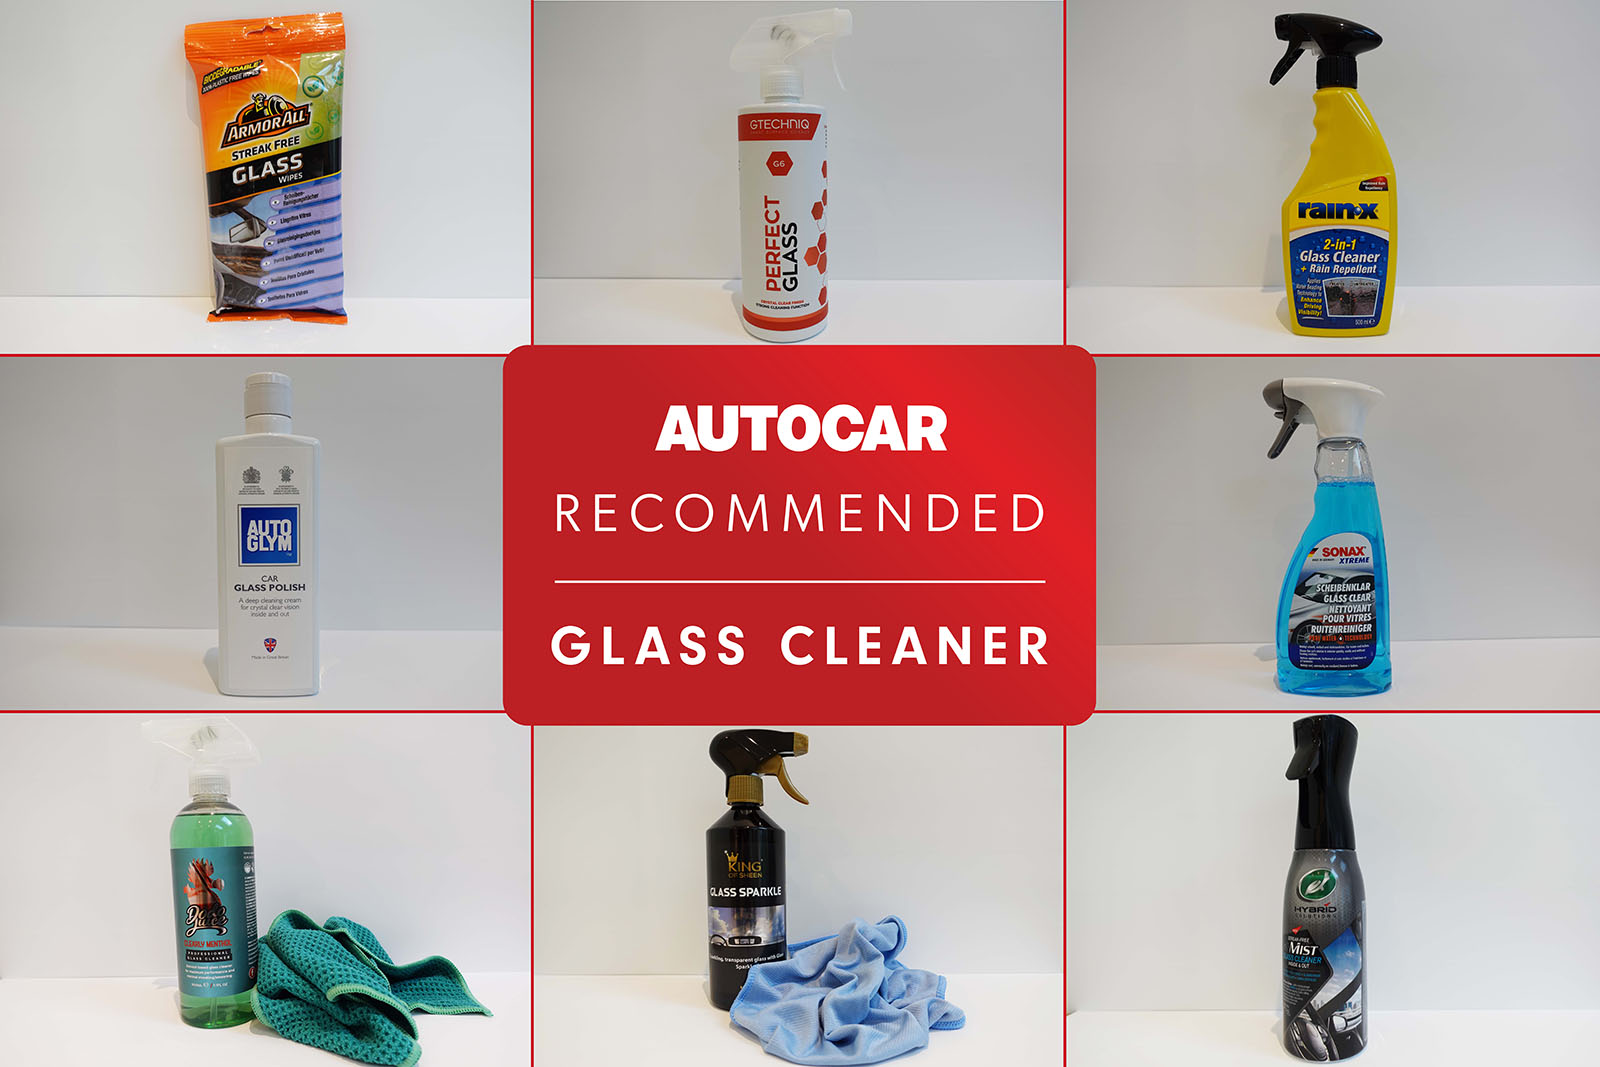 Full Product Review : AutoGlym Fast Glass